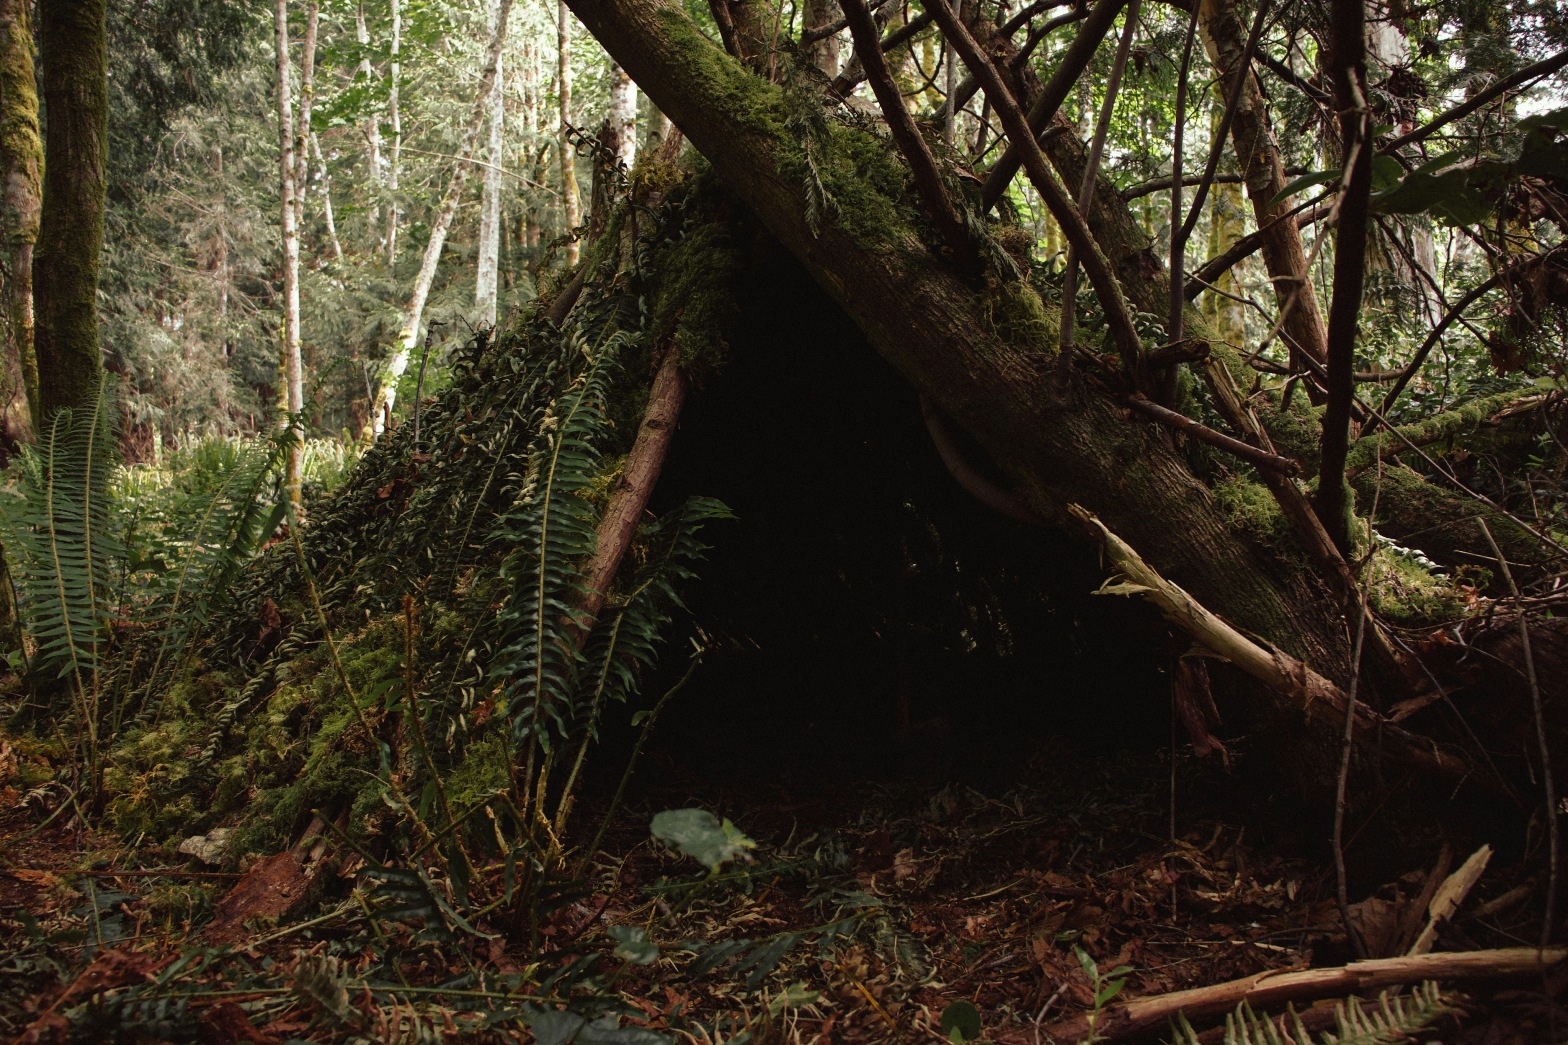 A shelter in the woods by Aedrian on Unsplash